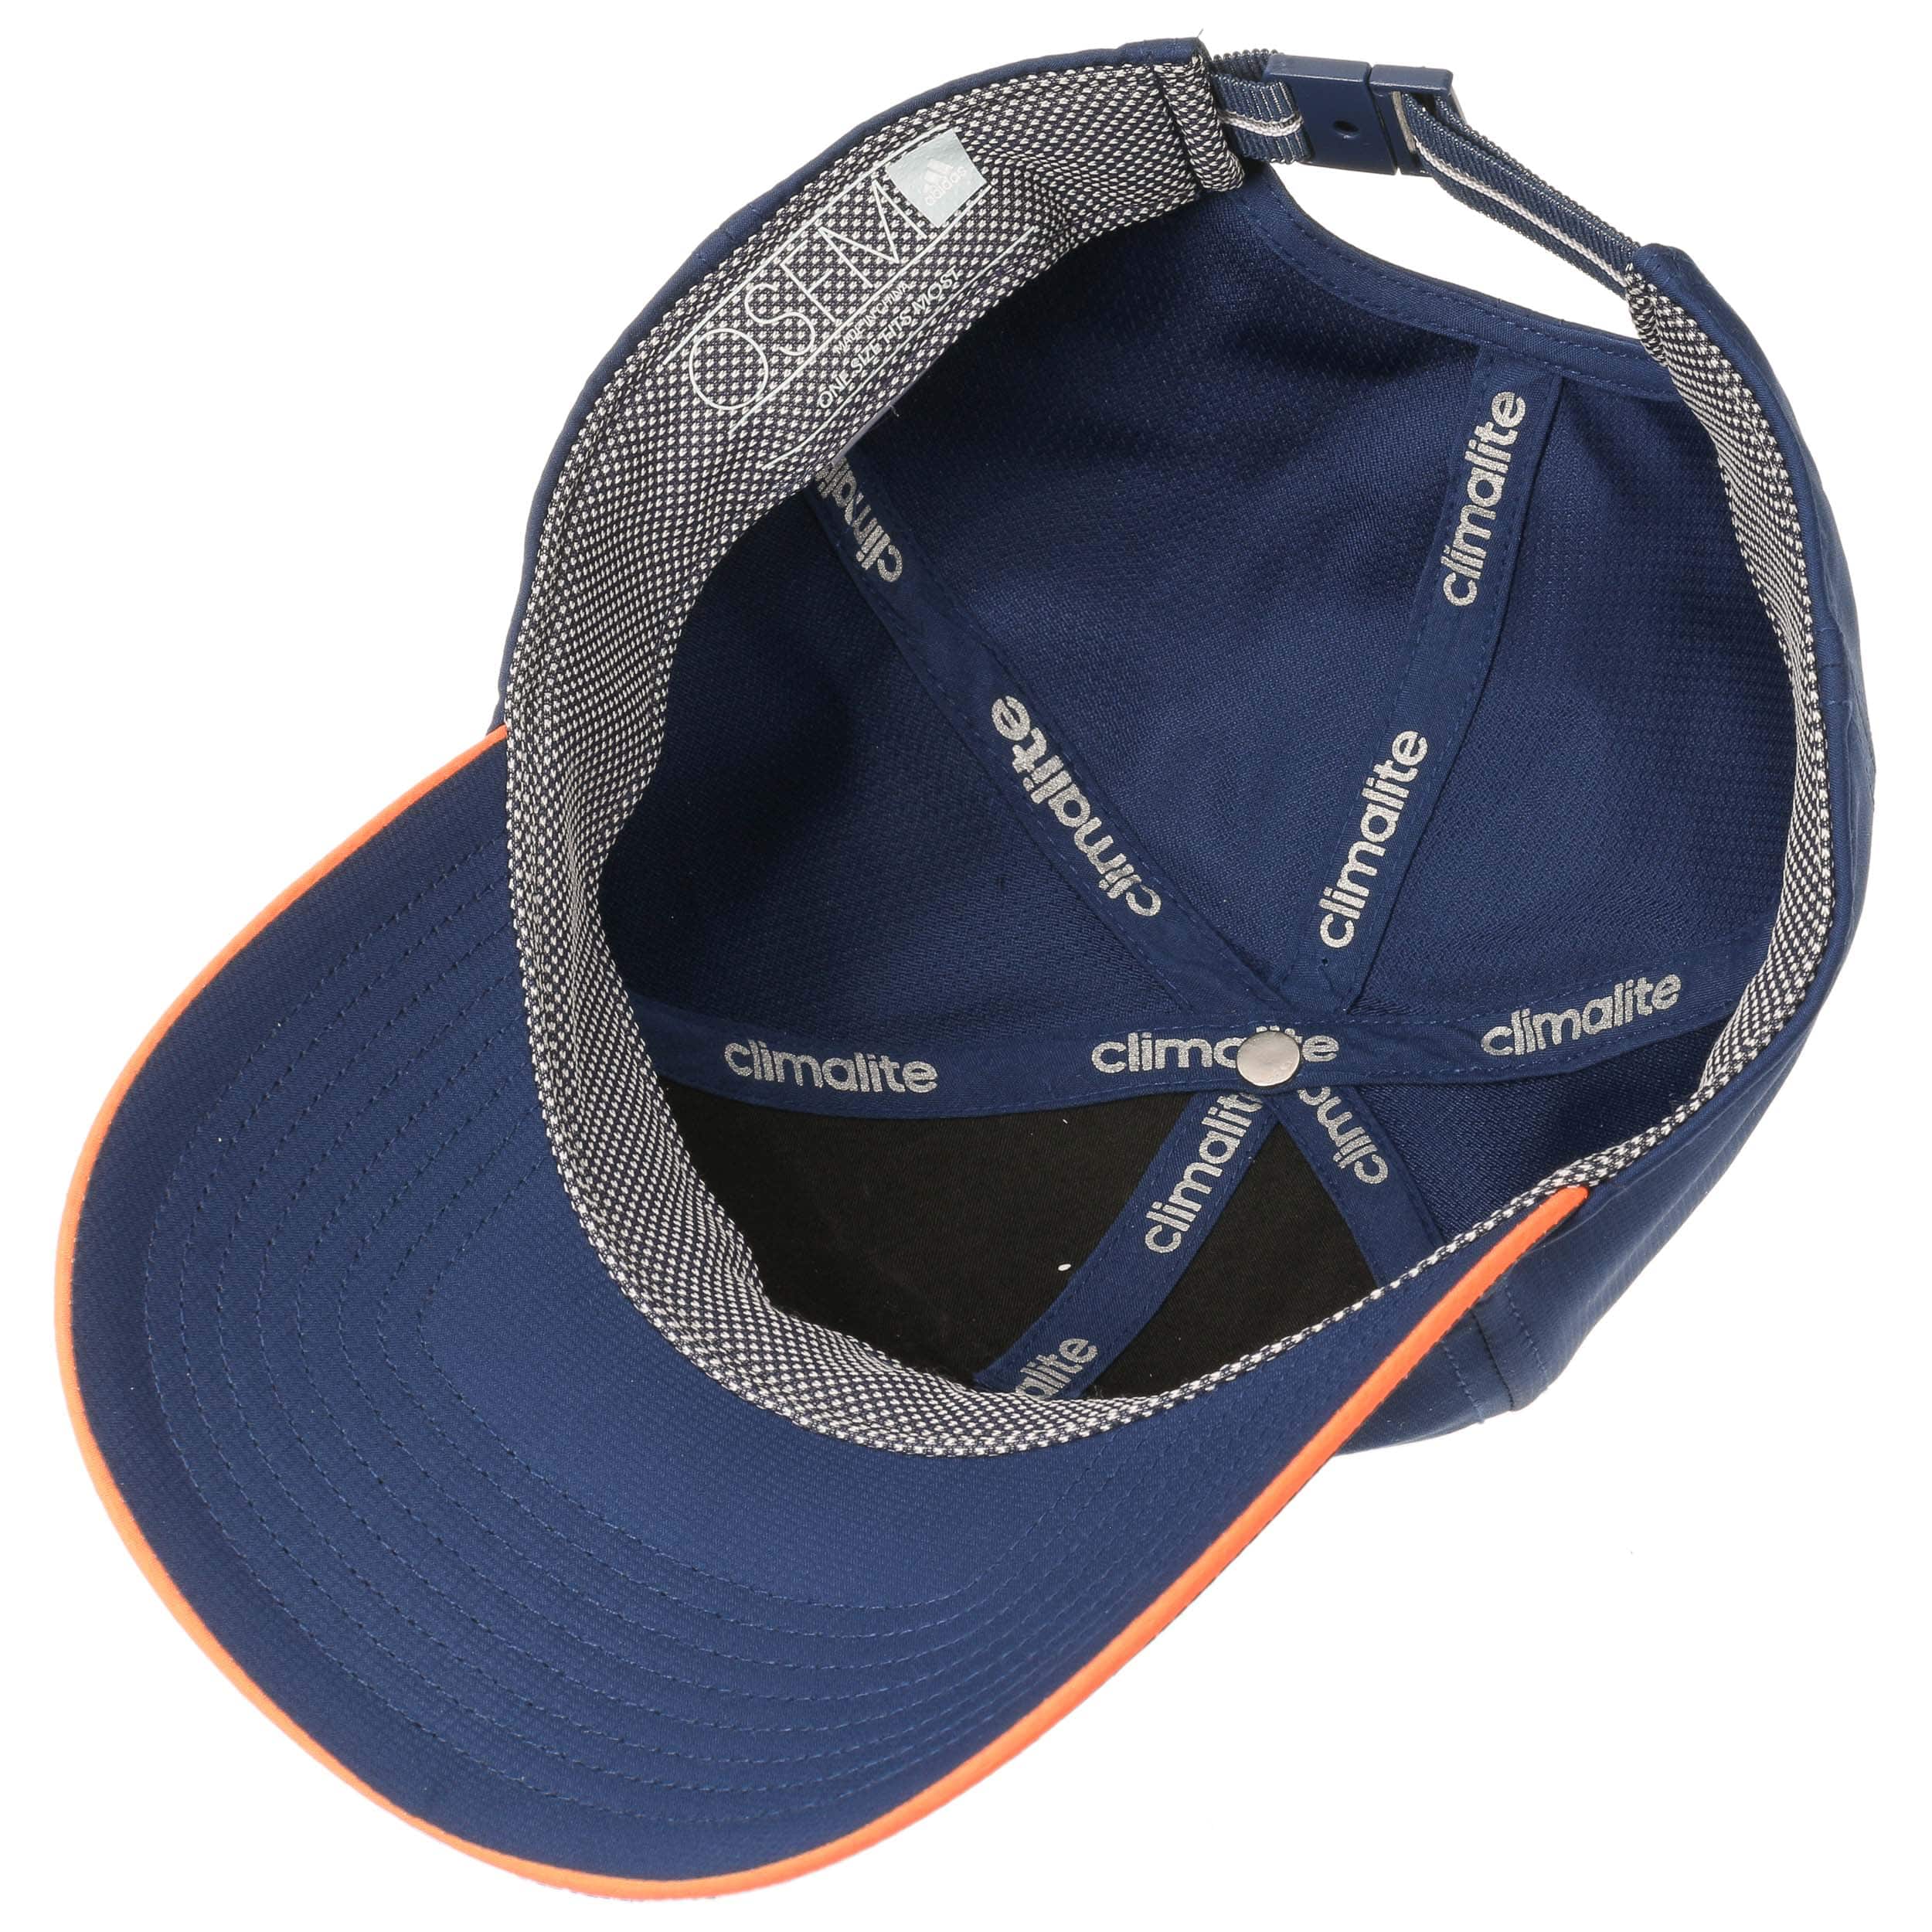 Classic Climalite Strapback Cap 19,95 adidas € - by